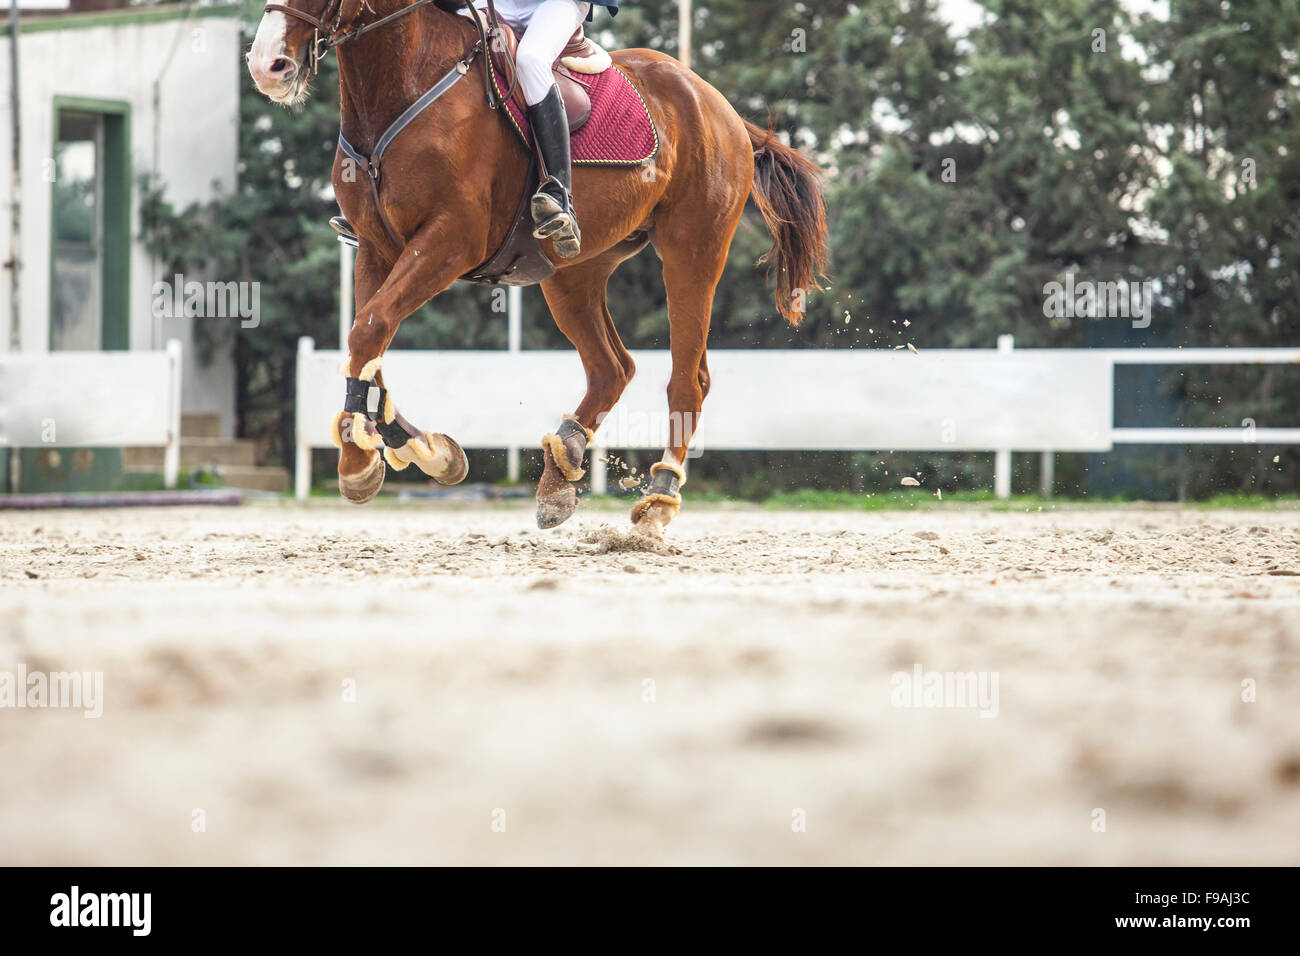 Horse starting the race before overtaking the obstacle at horse jumping competition Stock Photo